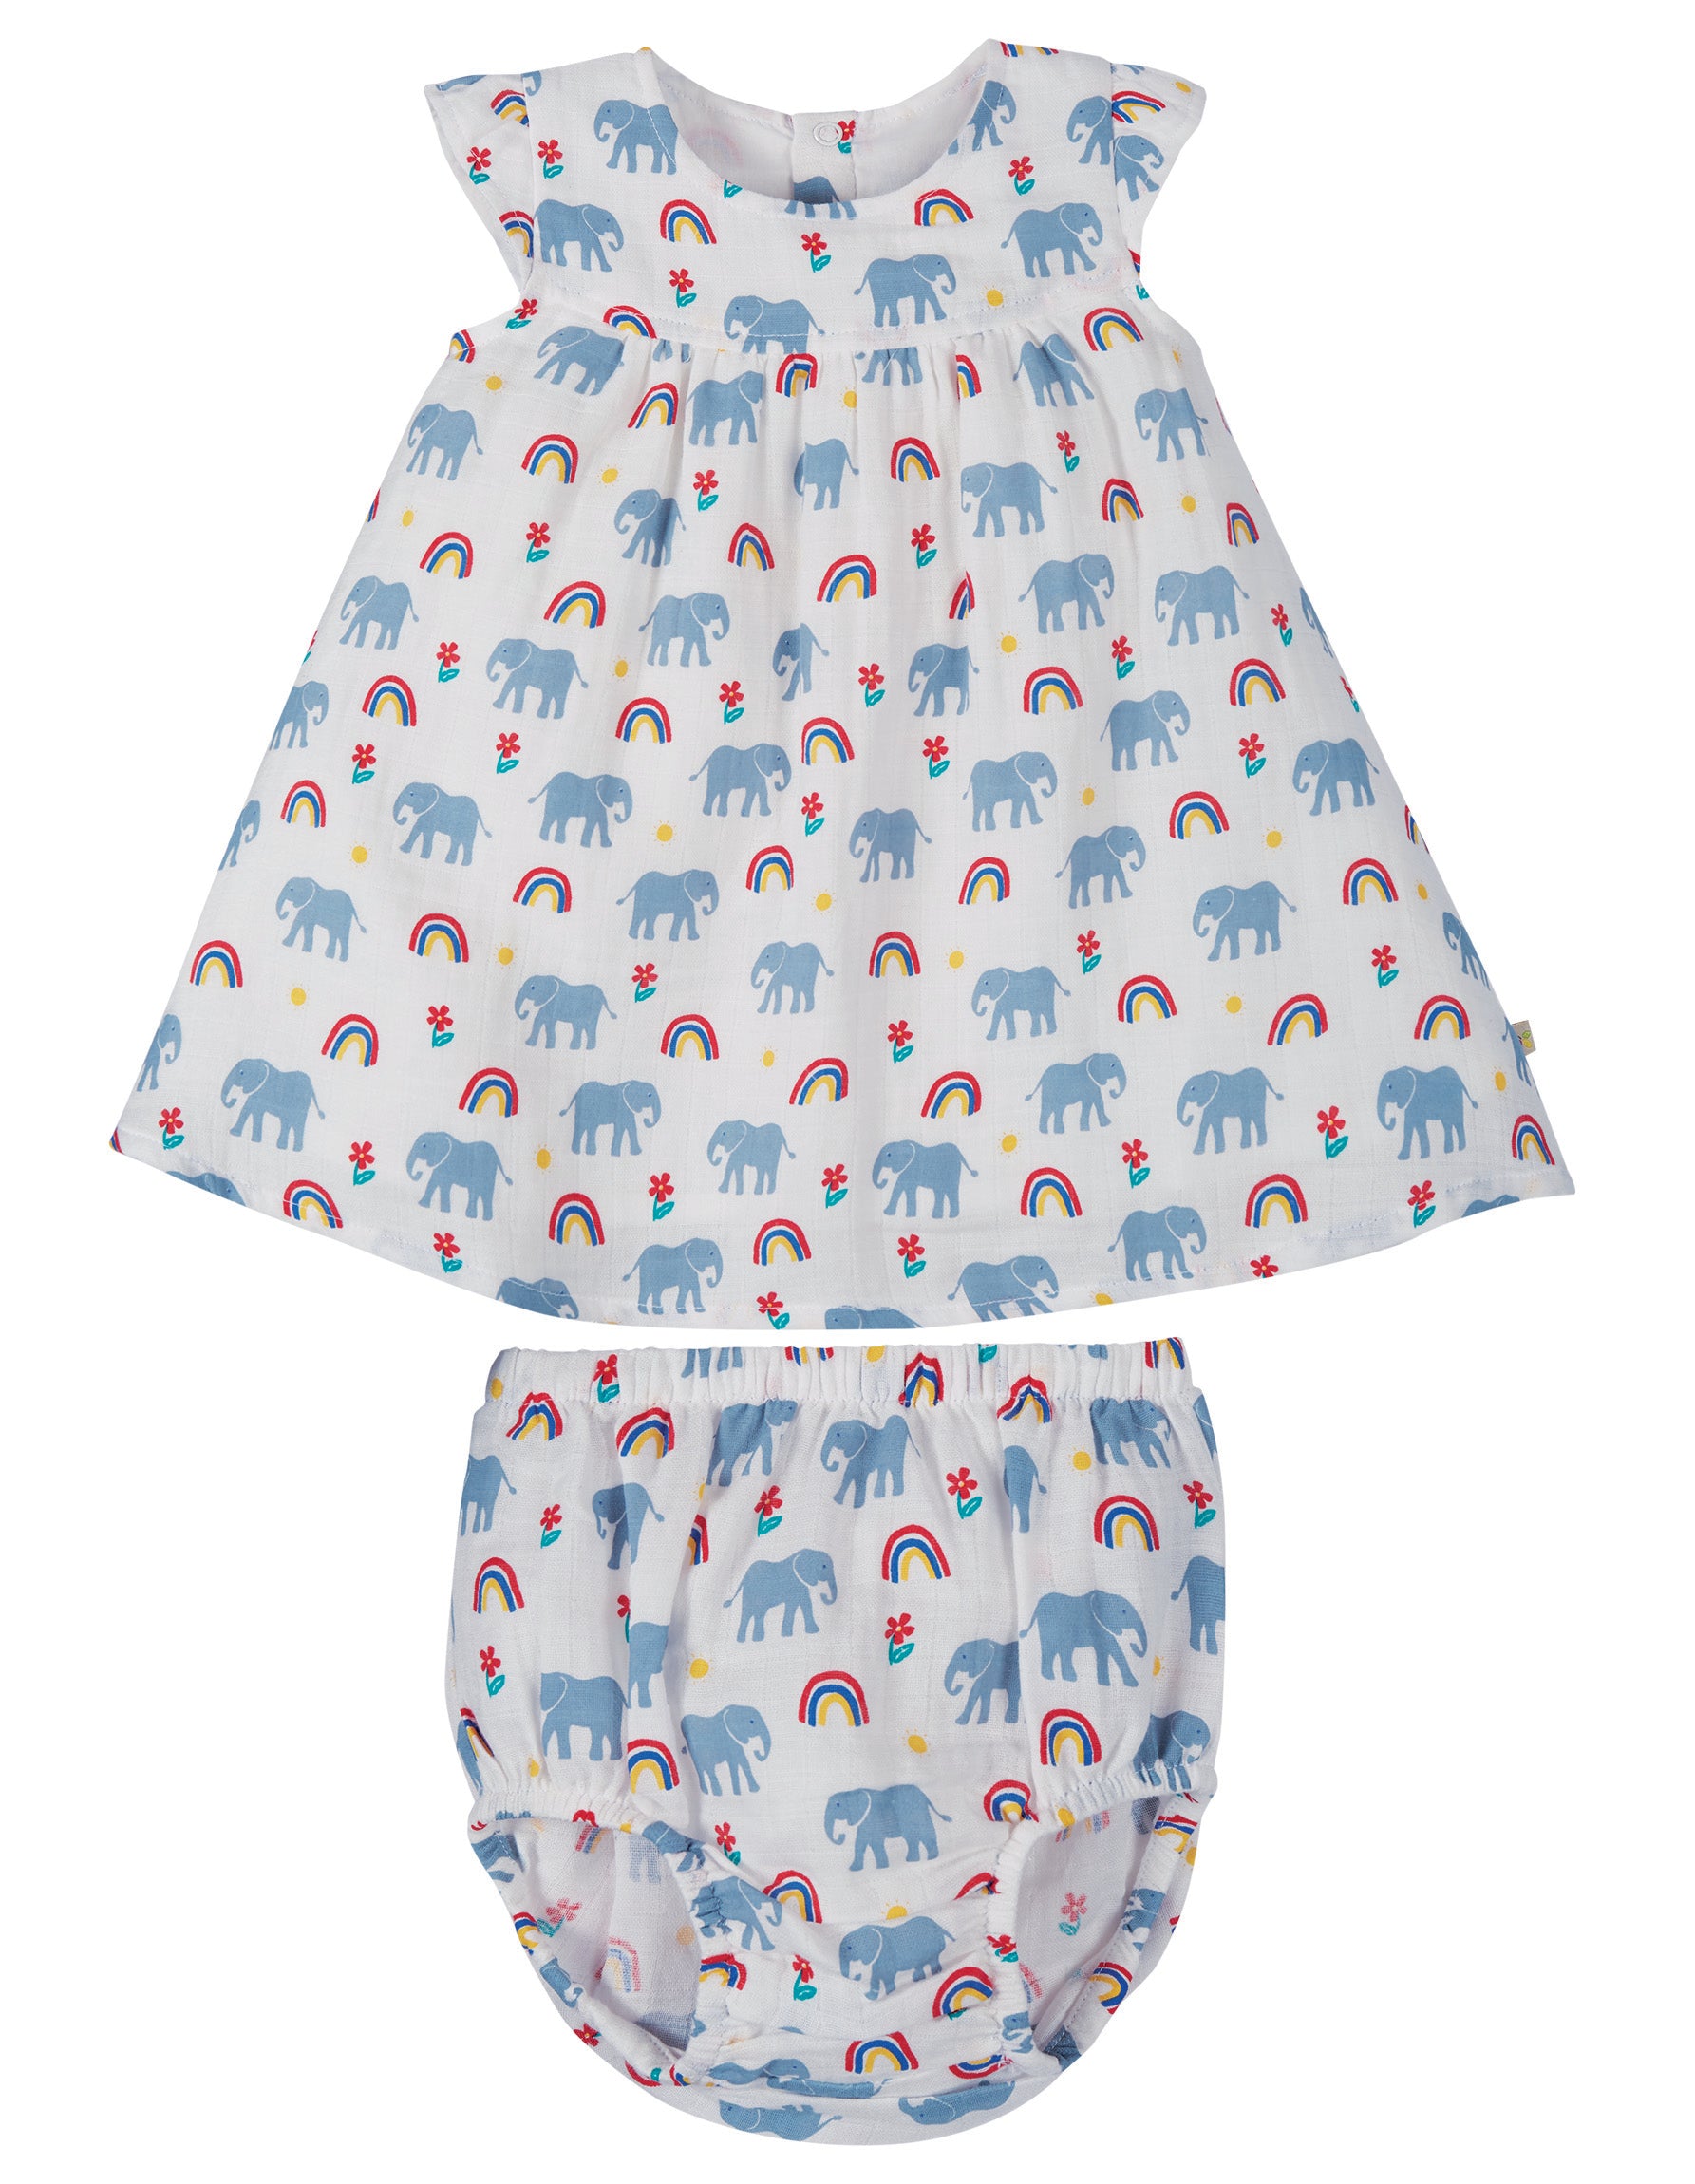 Frugi Dolly Muslin Outfit - Elephants